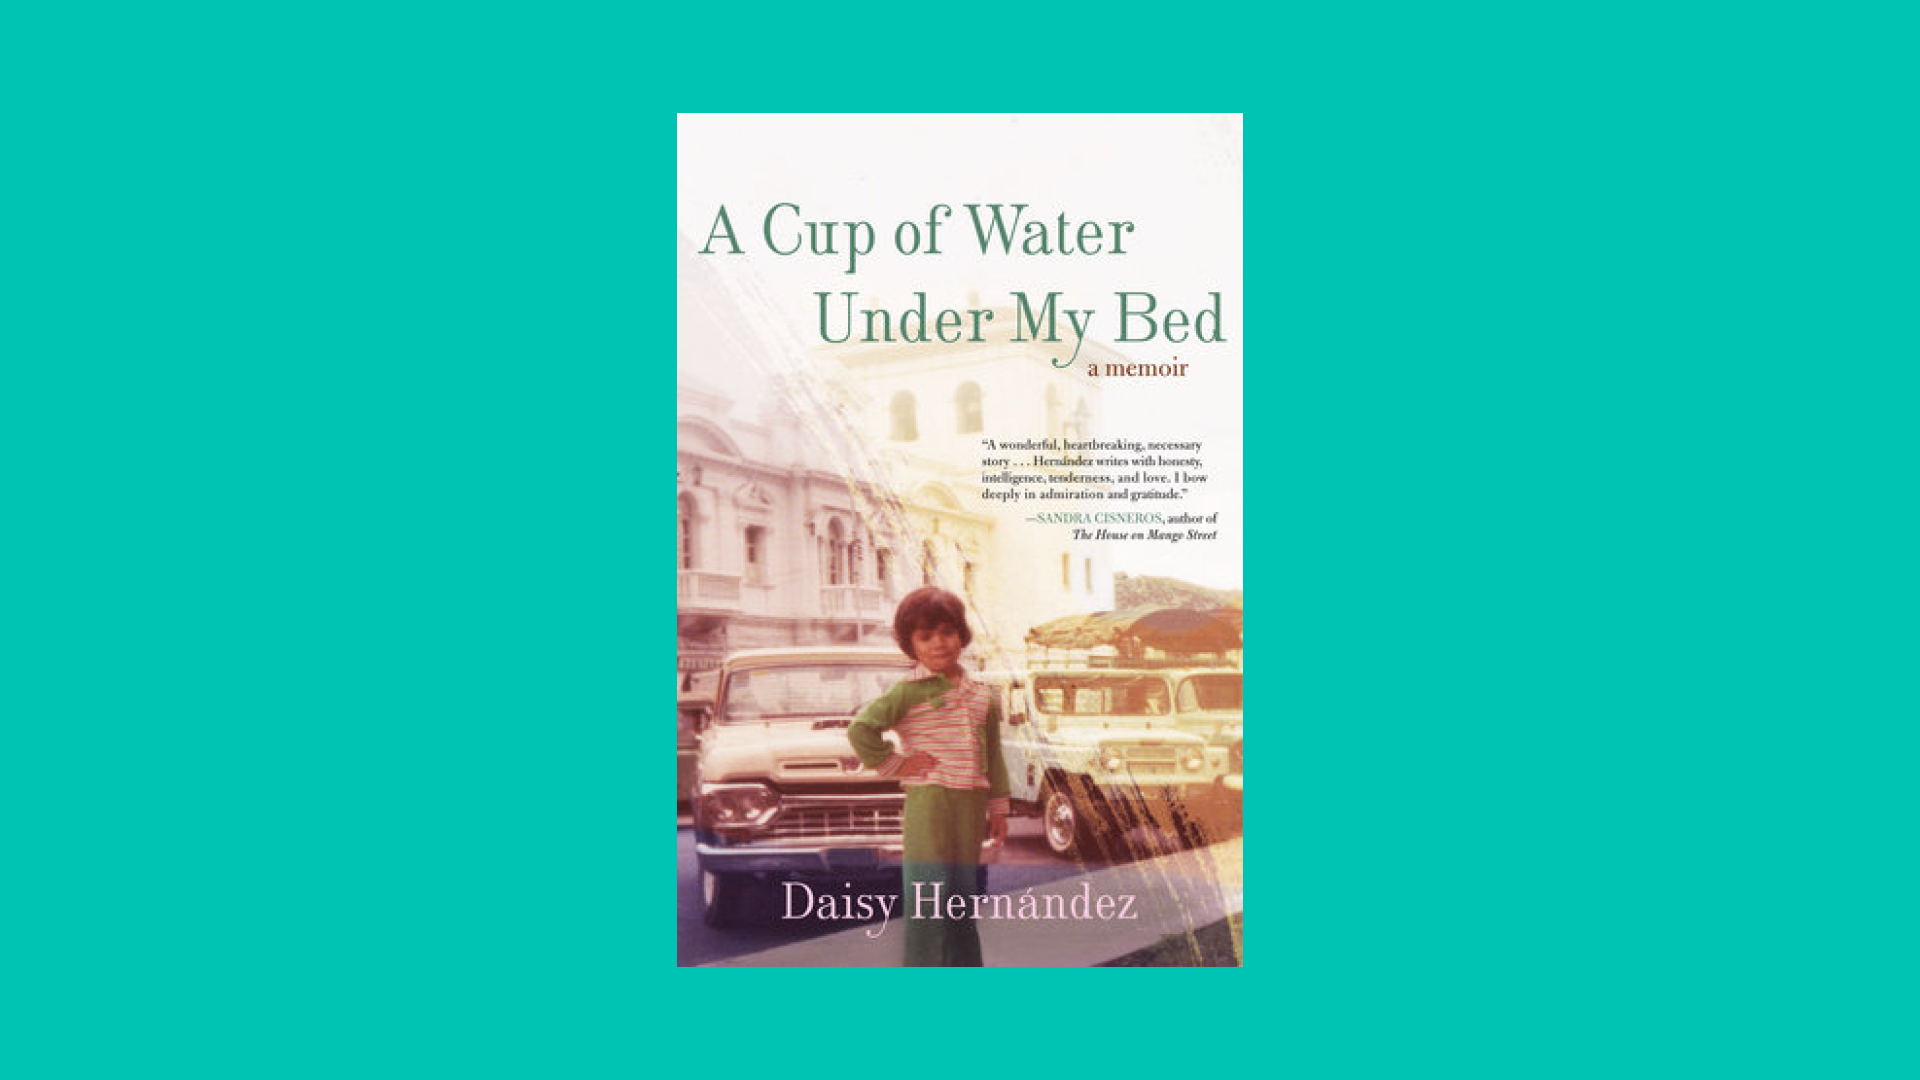 “A Cup of Water Under My Bed” by Daisy Hernández